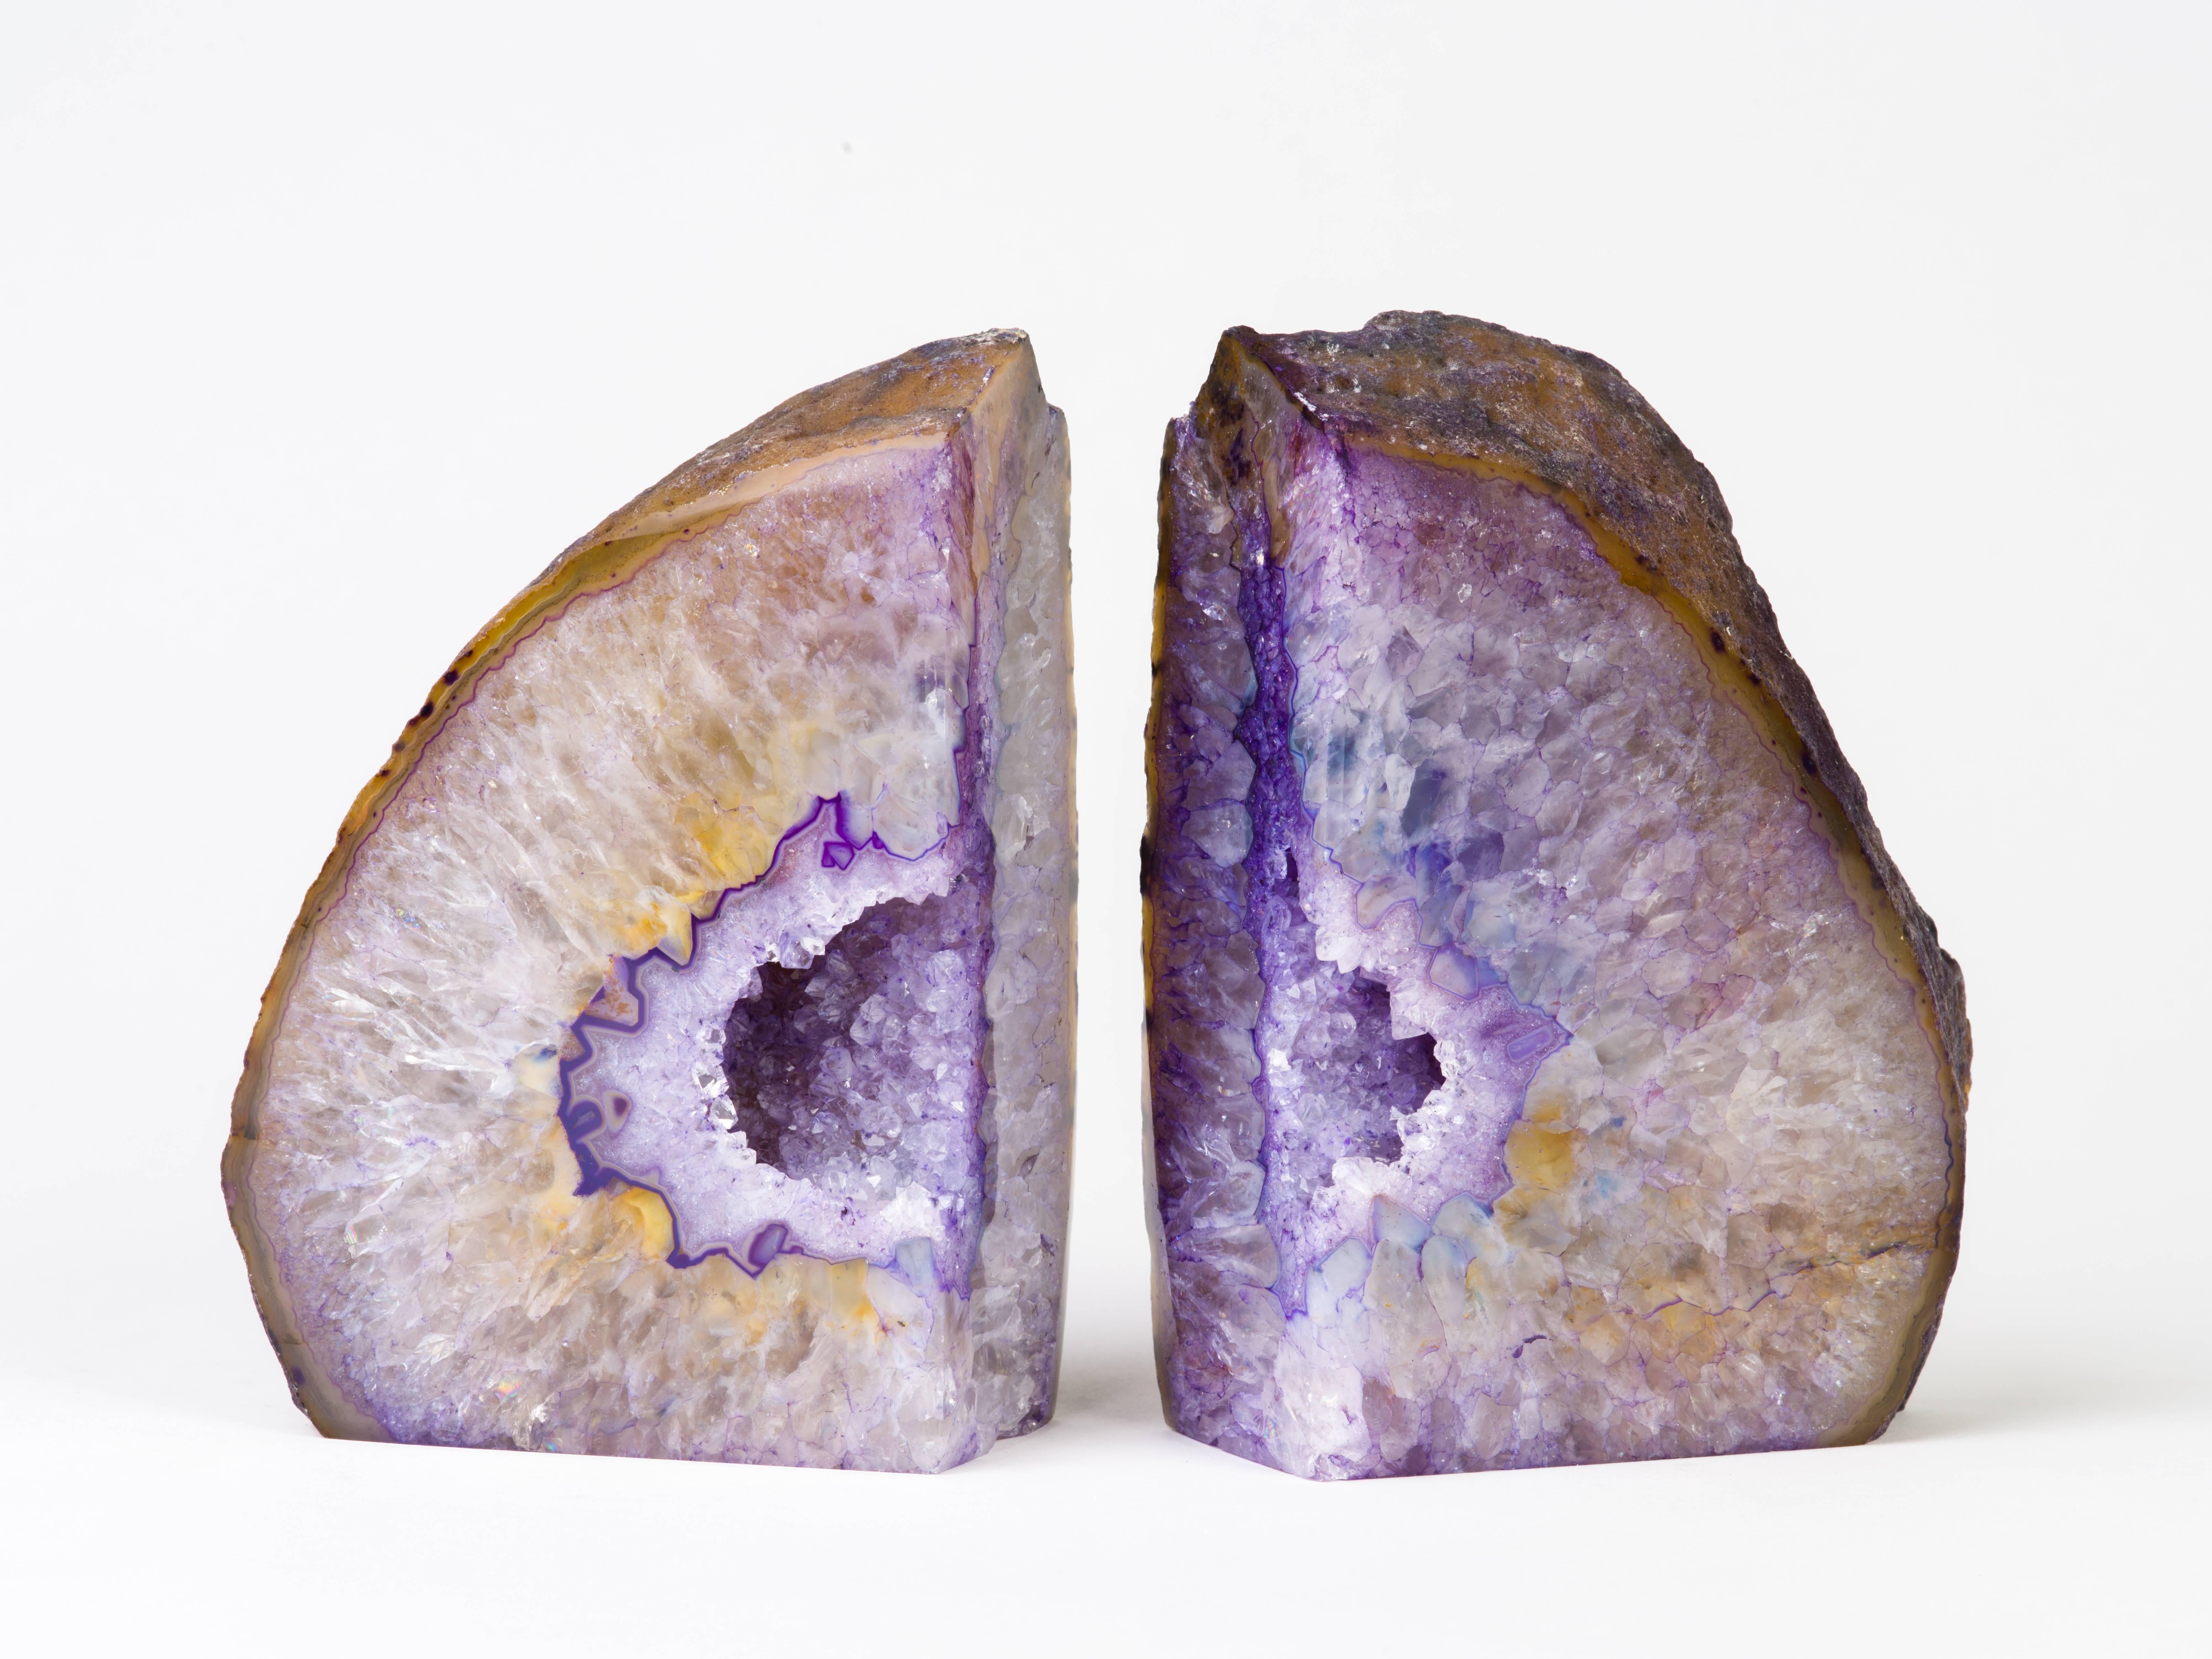 Organic Modern Pair of Stunning Quartz Crystal and Amethyst Bookends in Hues of Purple